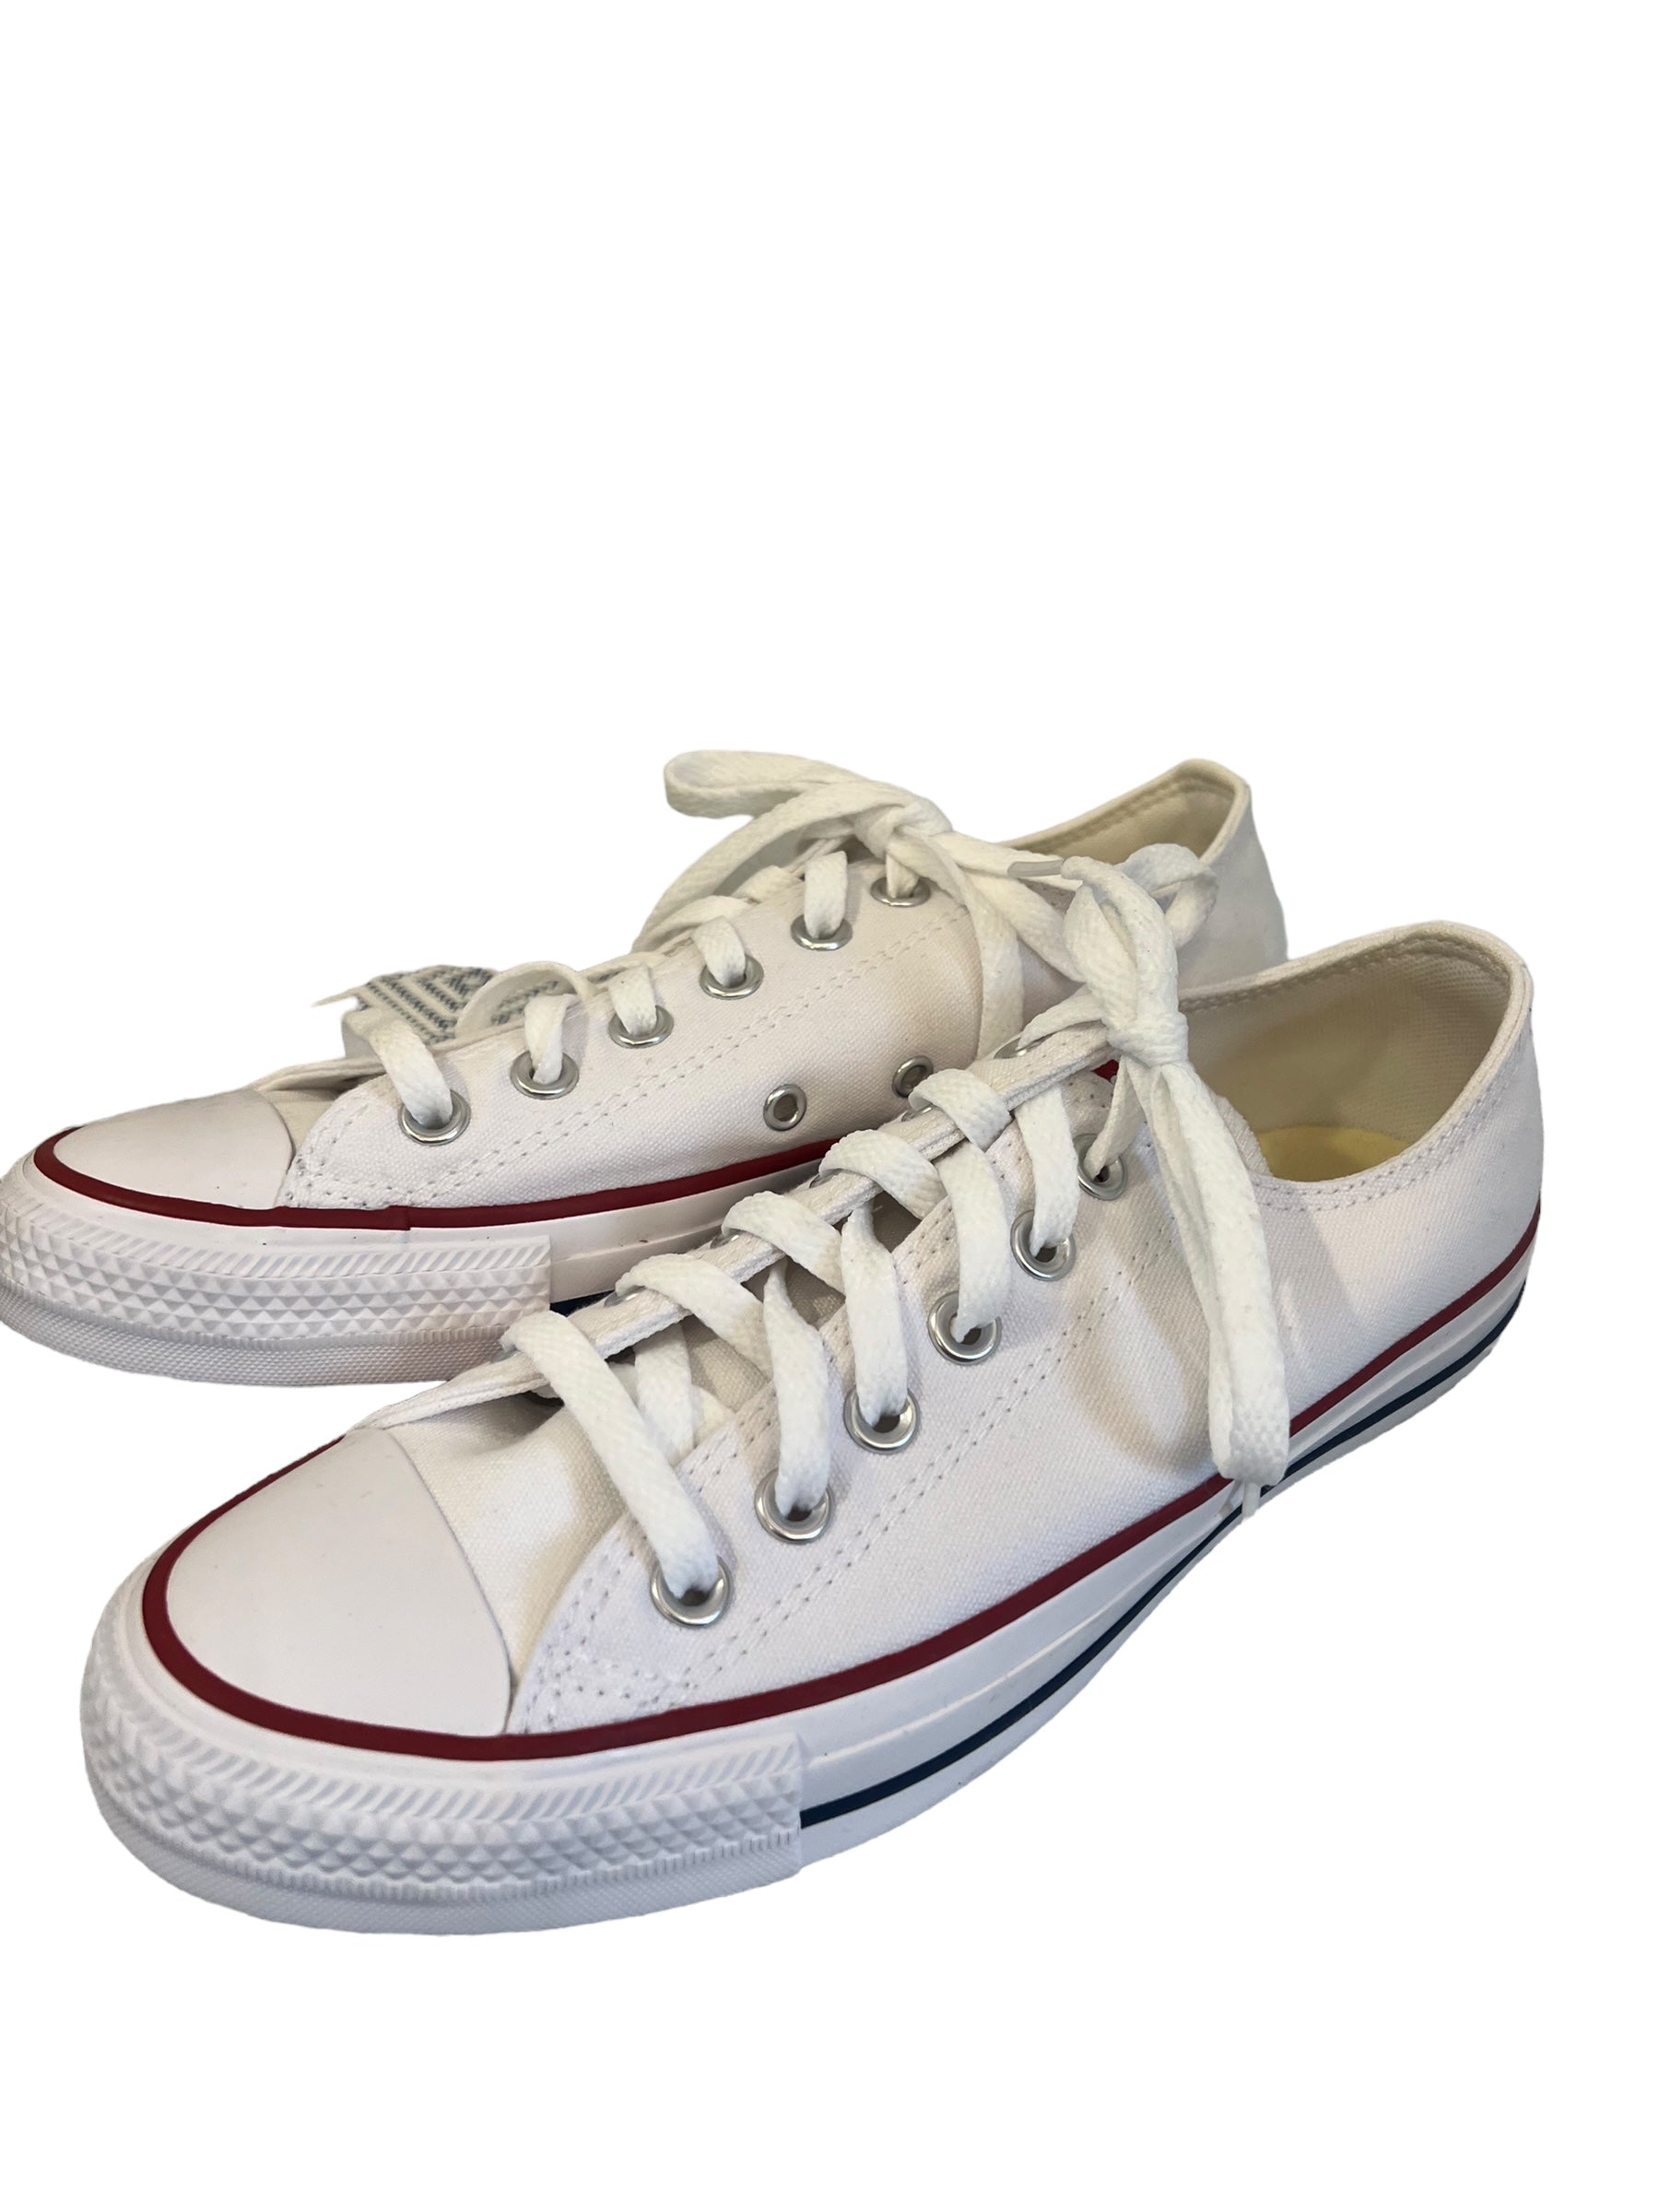 Converse OX white trainers 6